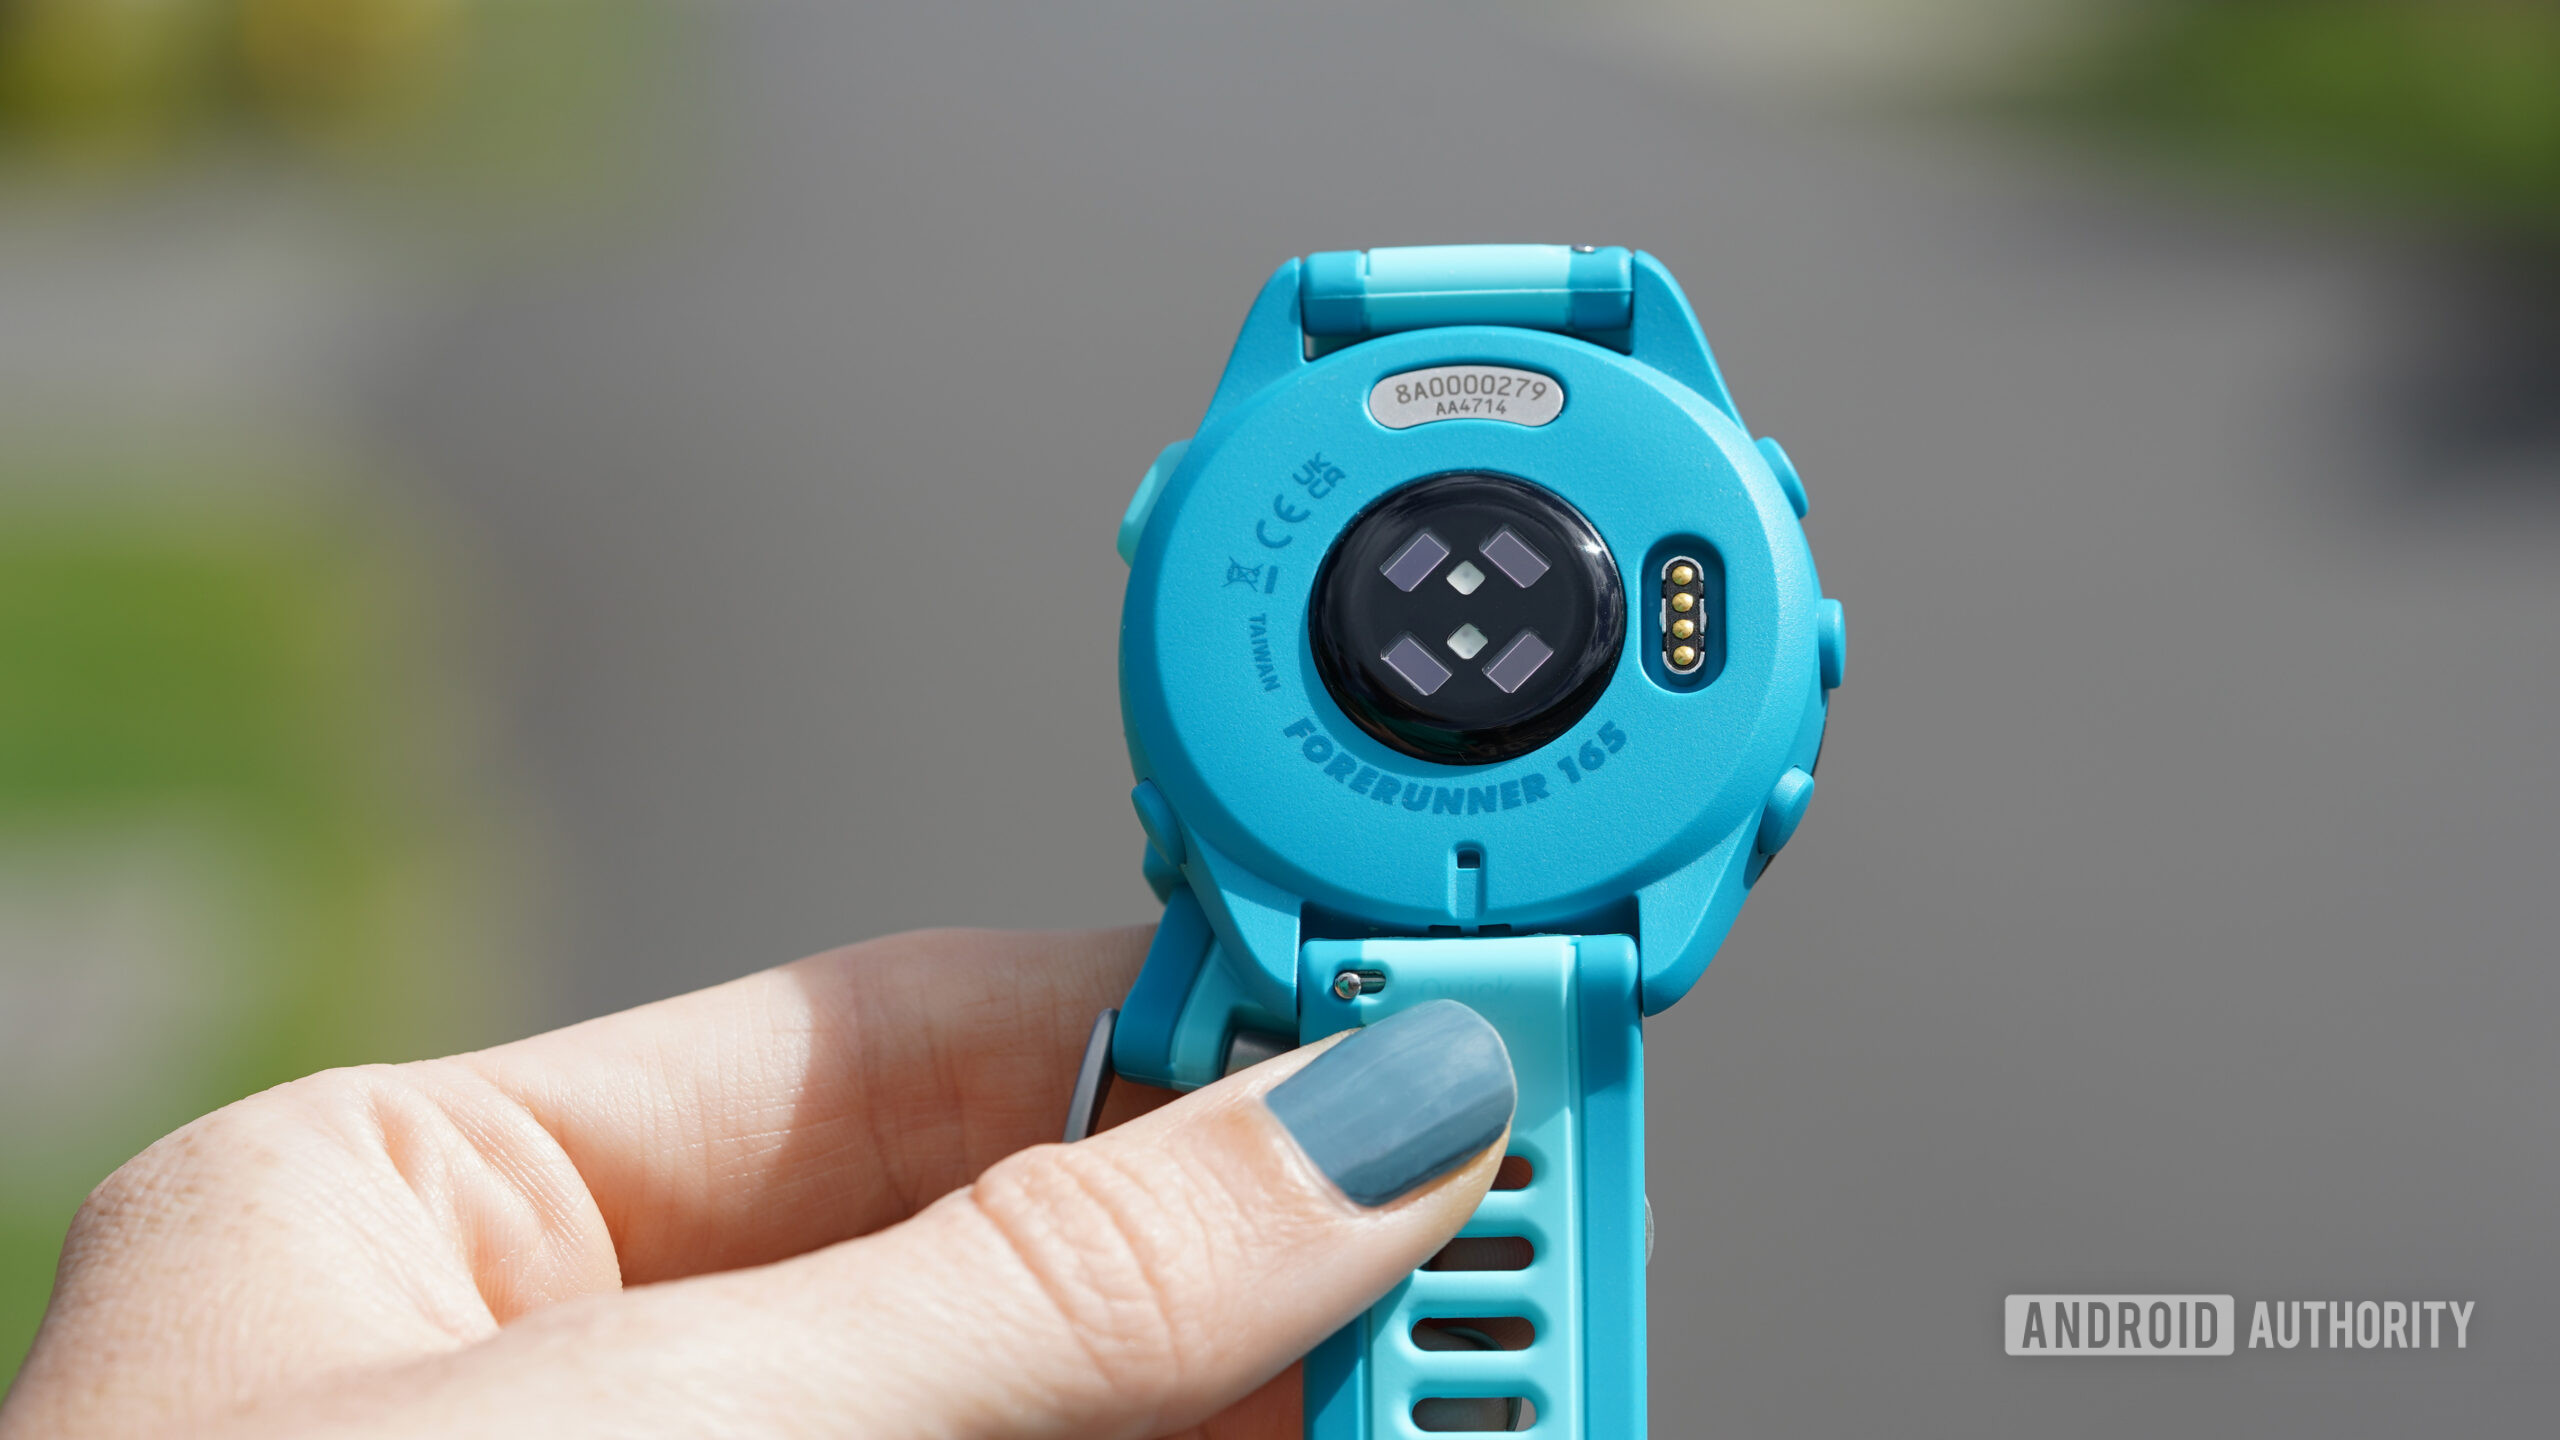 The Garmin Forerunner 165 features accurate sensors for monitoring daily and overnight stats.